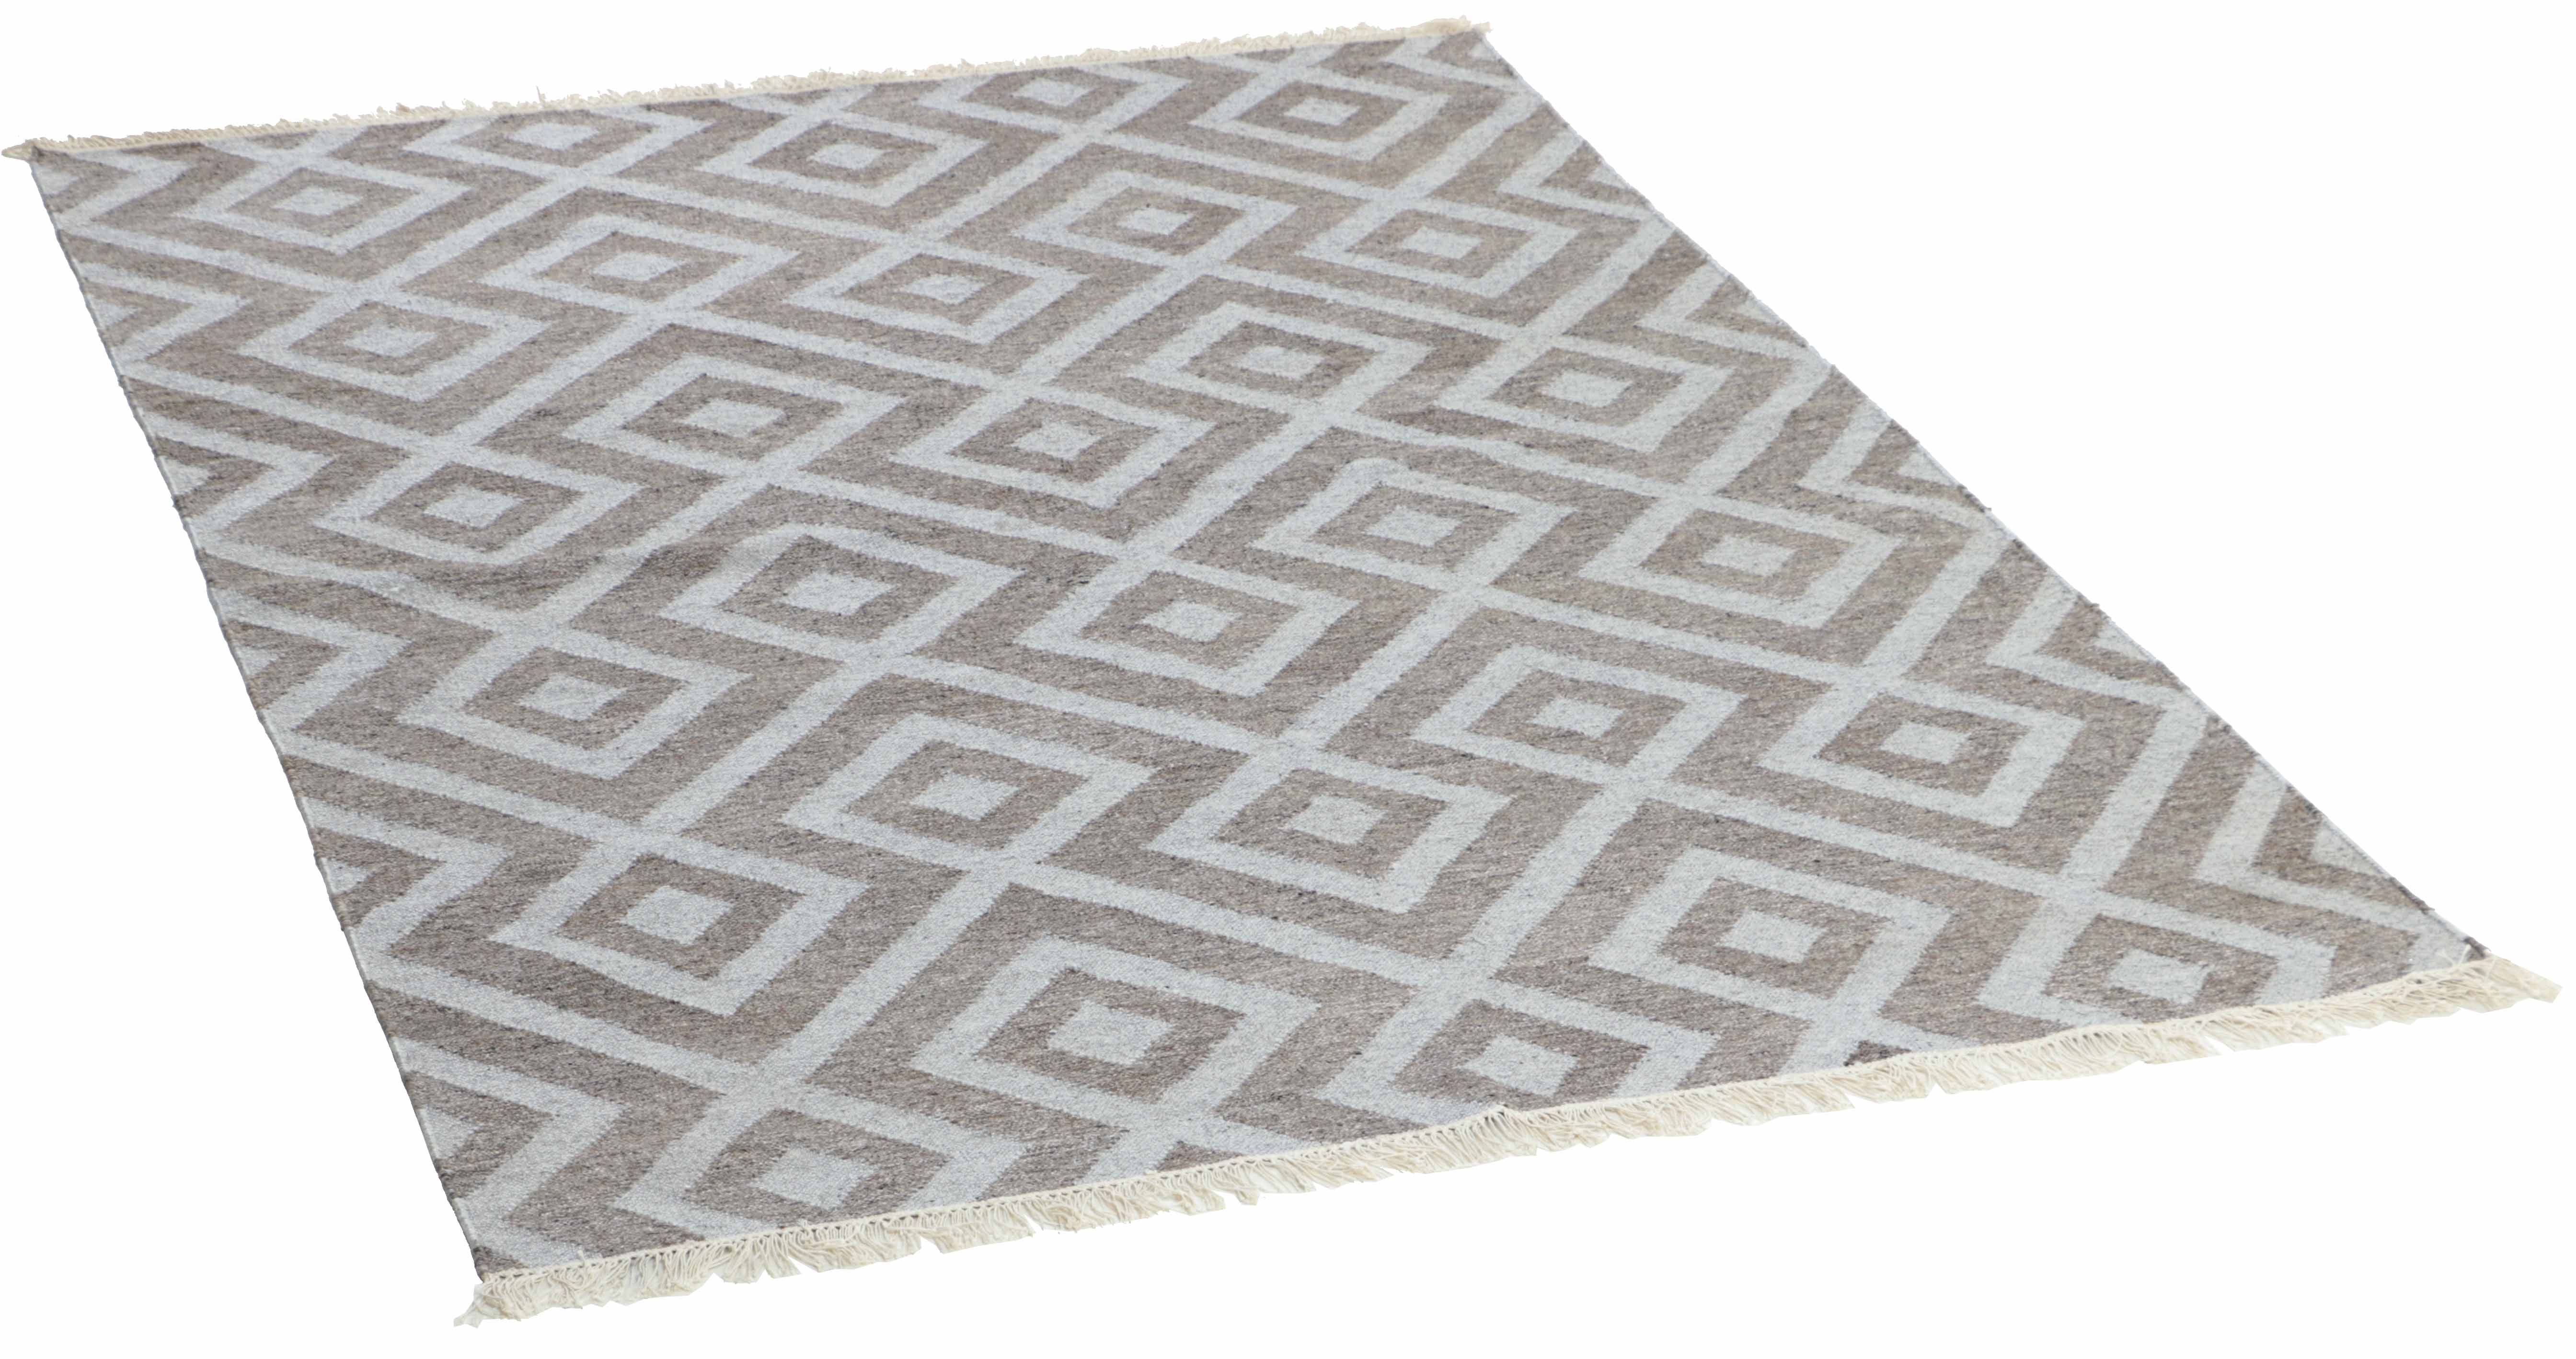 Runner with geometric pattern in grey